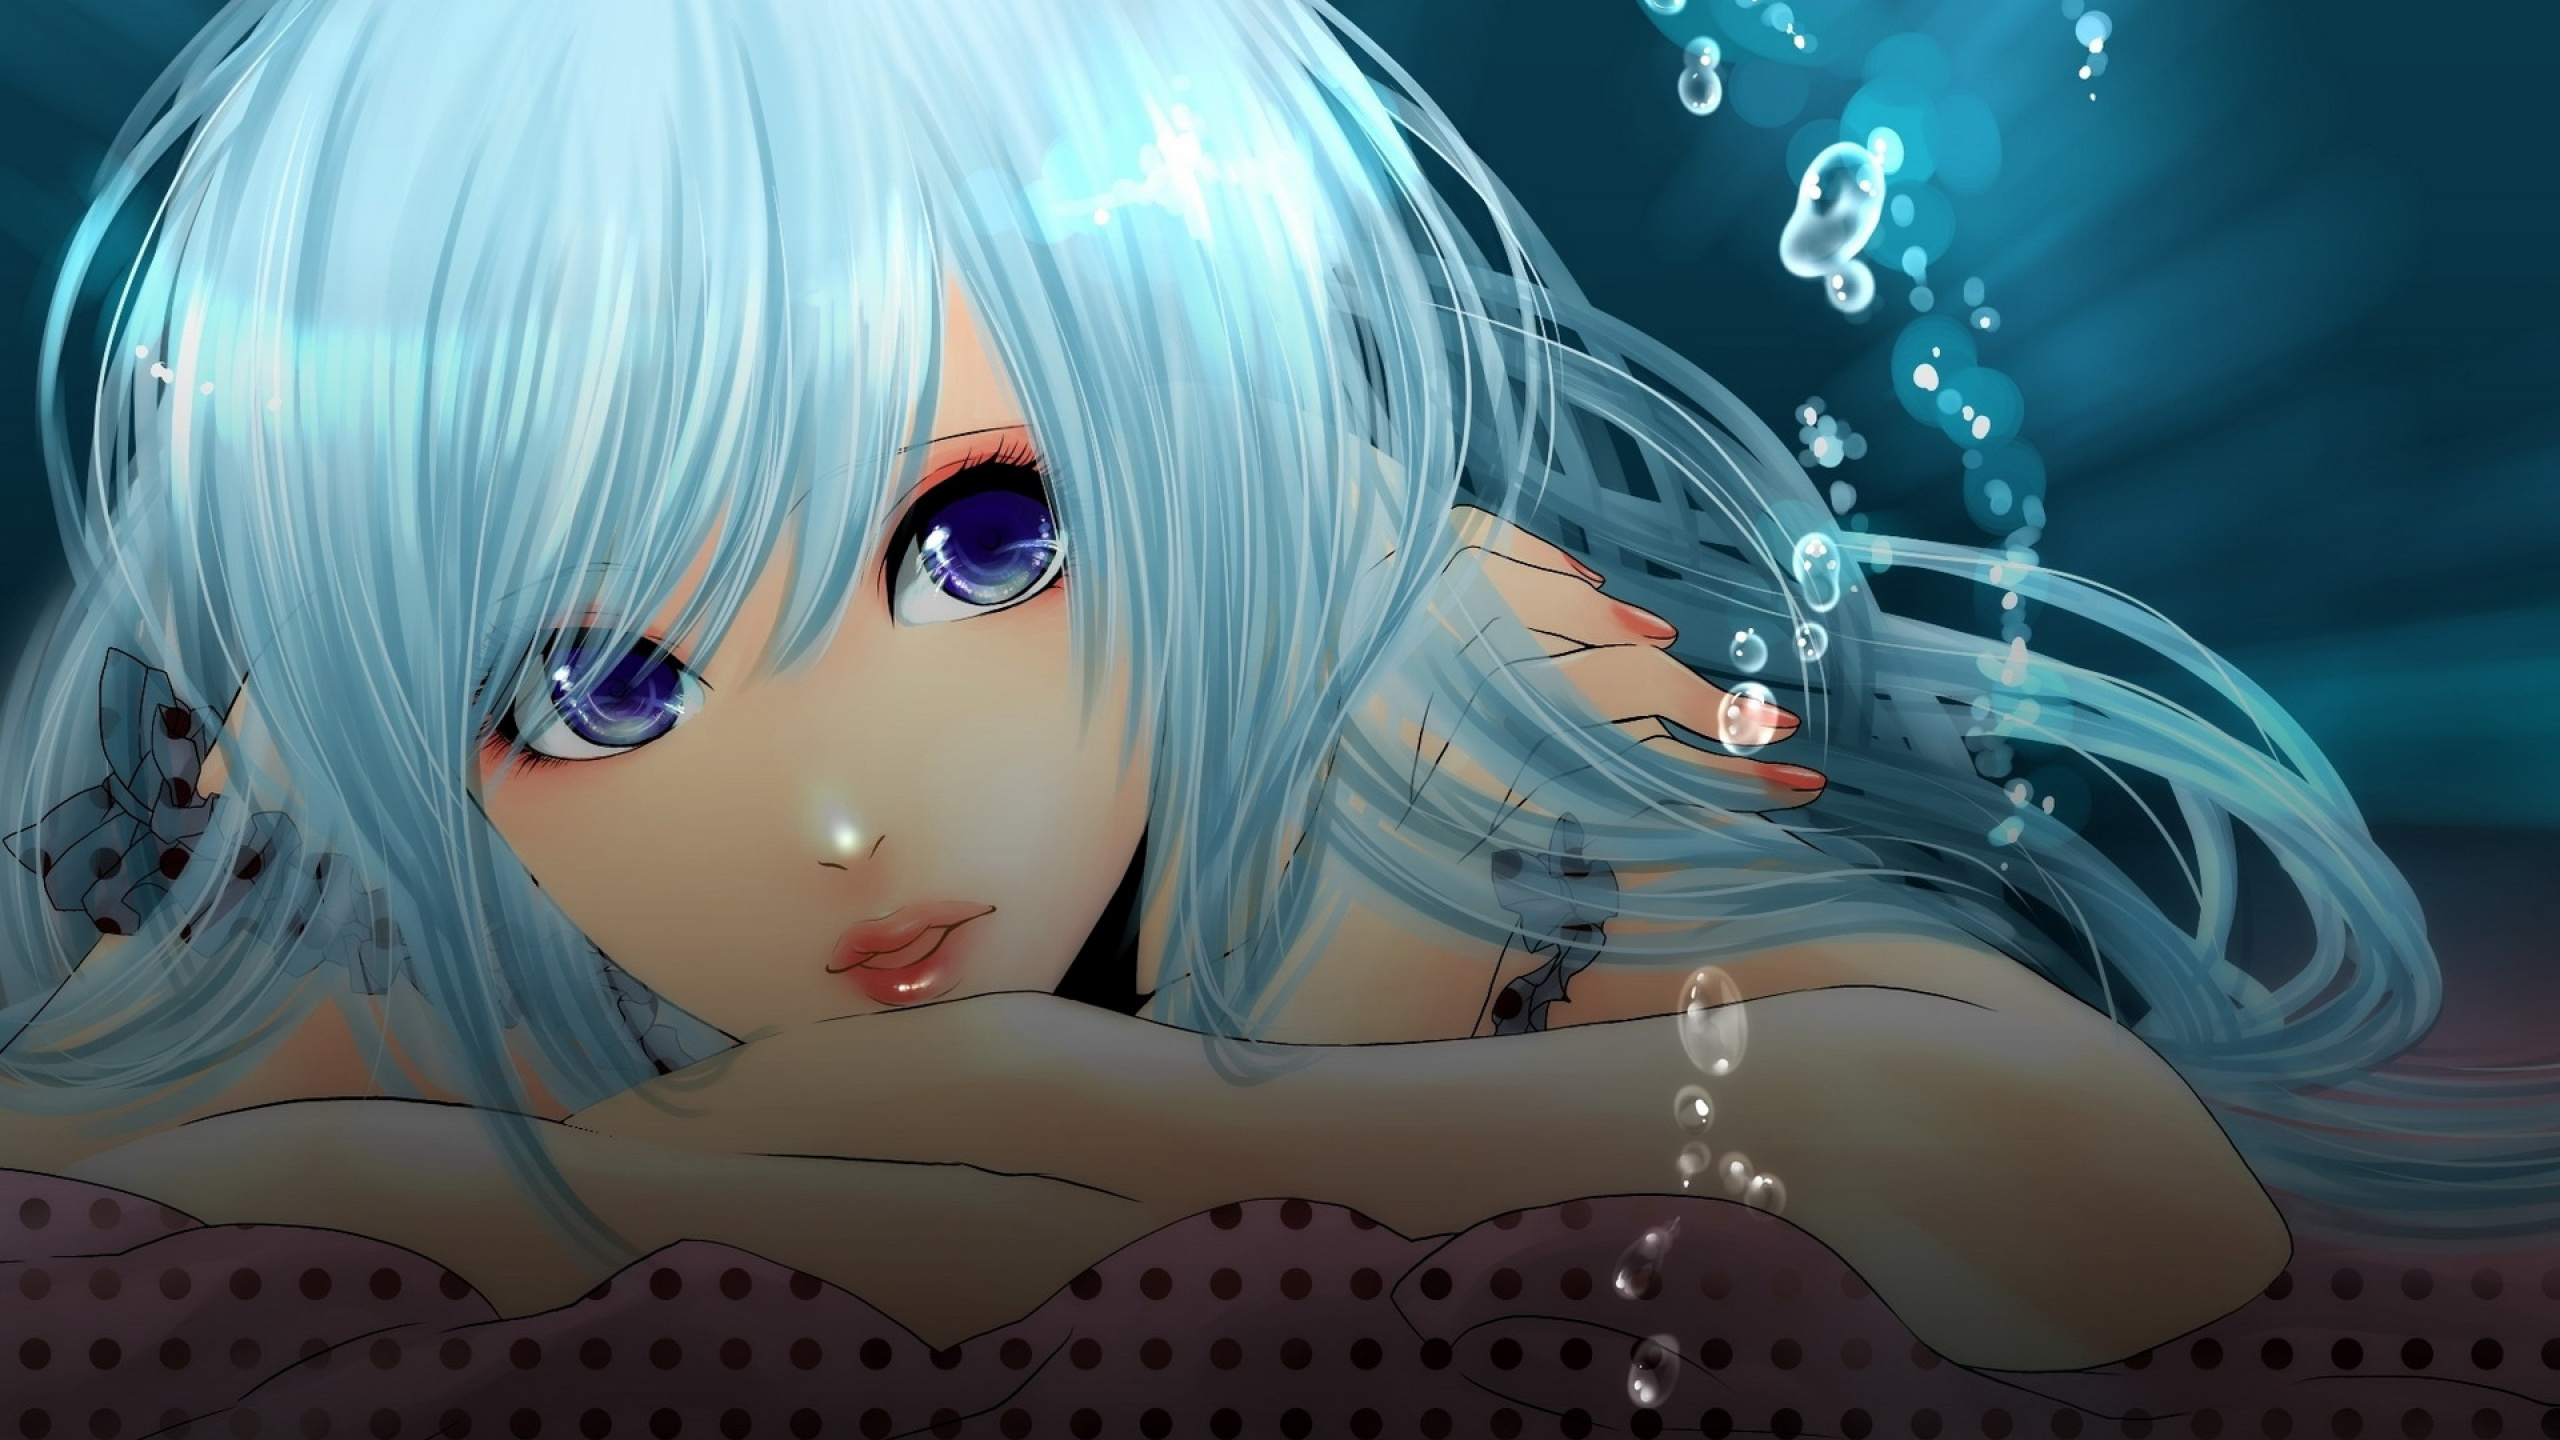 Blue Haired Female Anime Character. Wallpaper in 2560x1440 Resolution